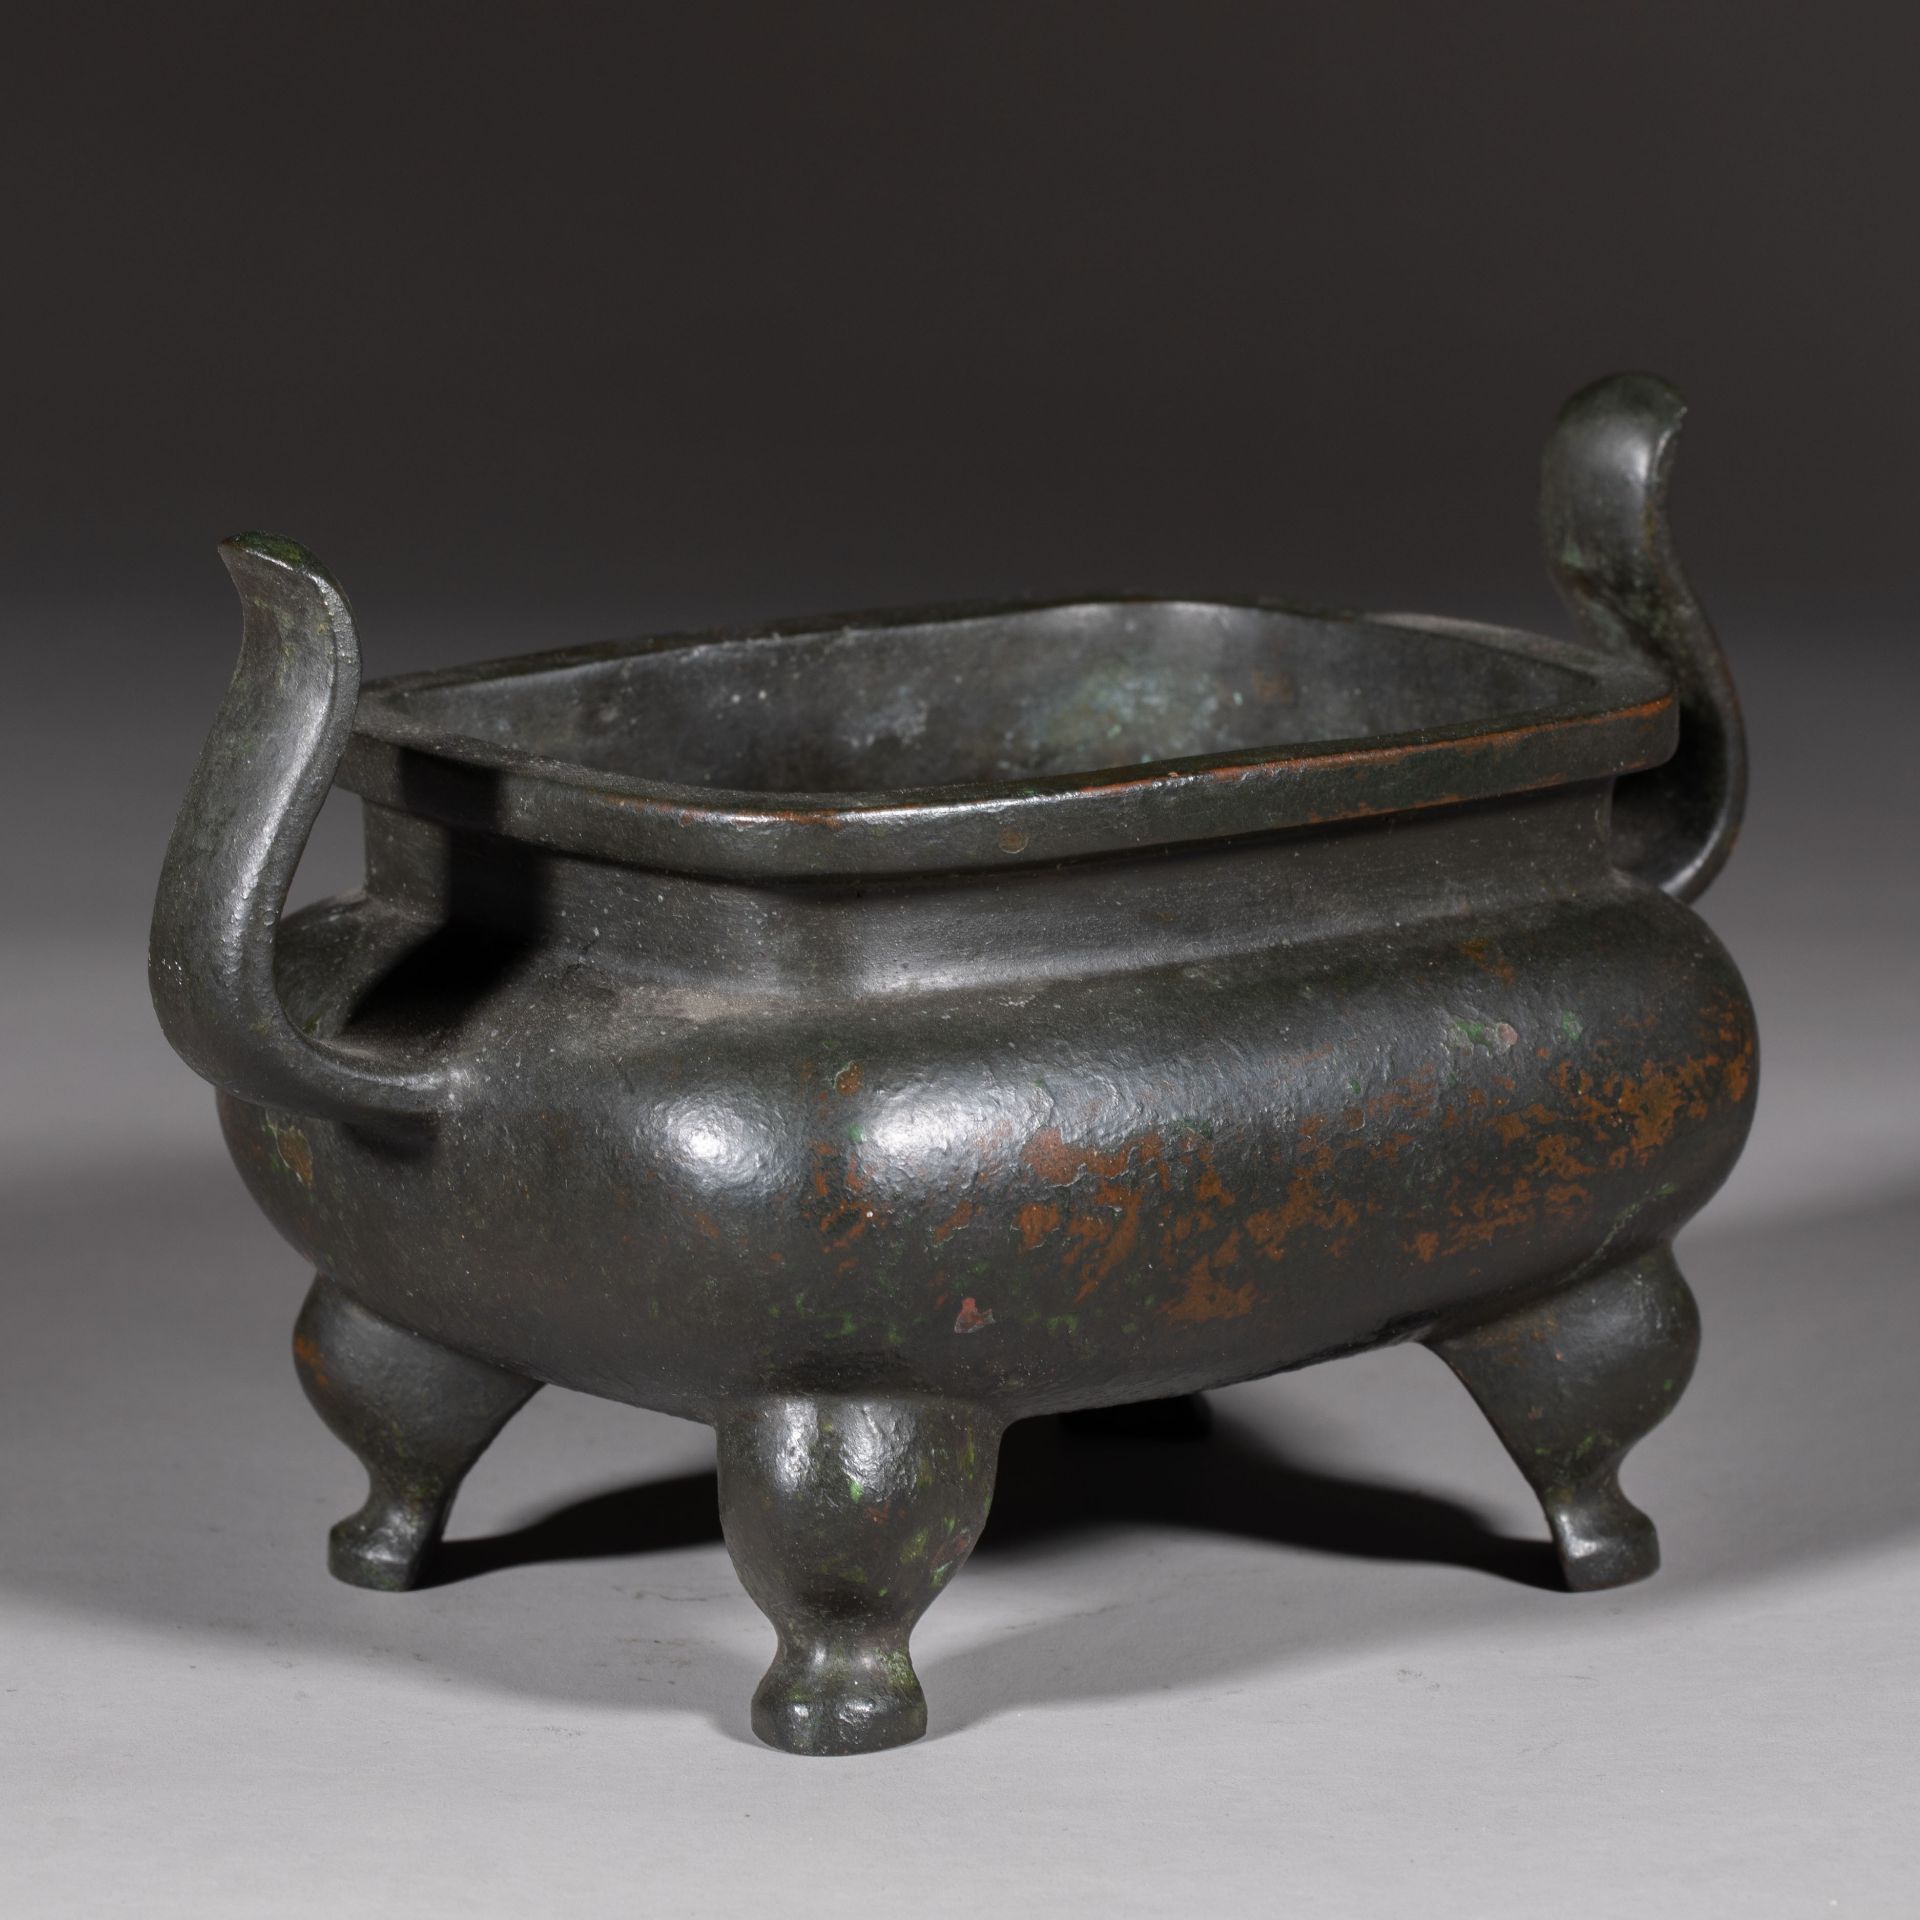 Qianlong copper incense burner  from Qing dynasty  - Image 4 of 7